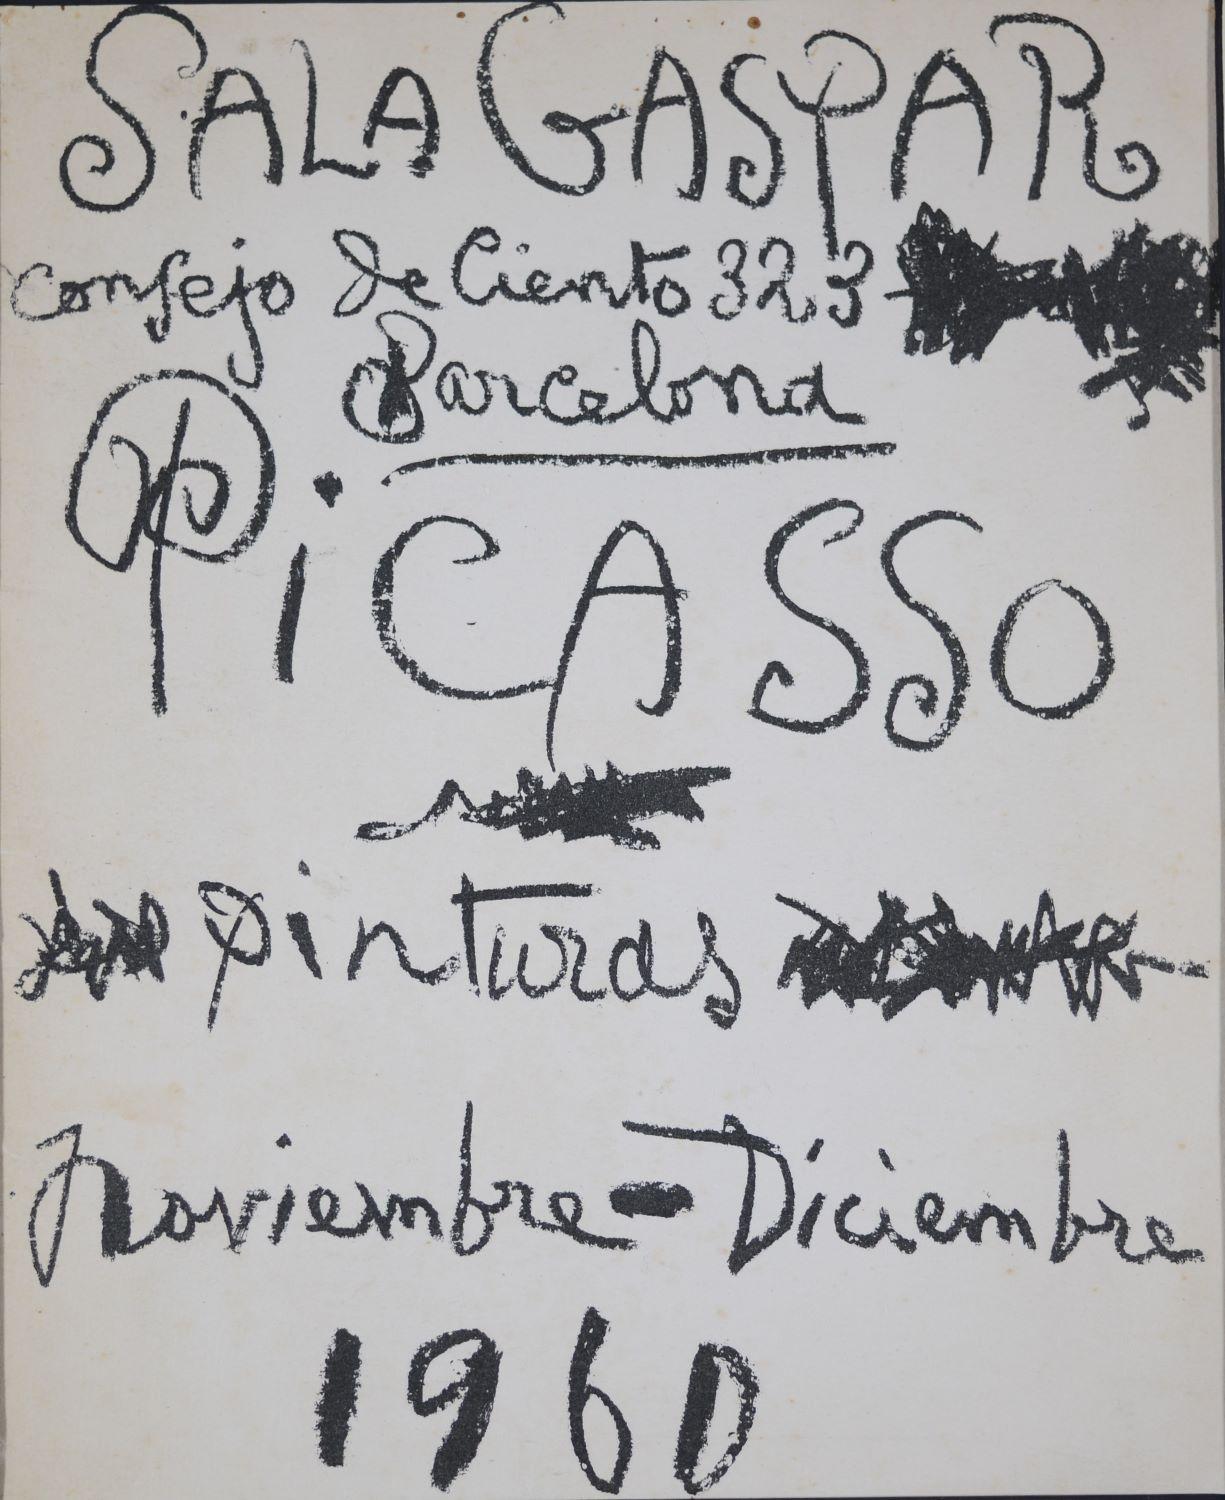 Pablo Picasso Abstract Print - "Sala Gaspar Exhibition Poster"